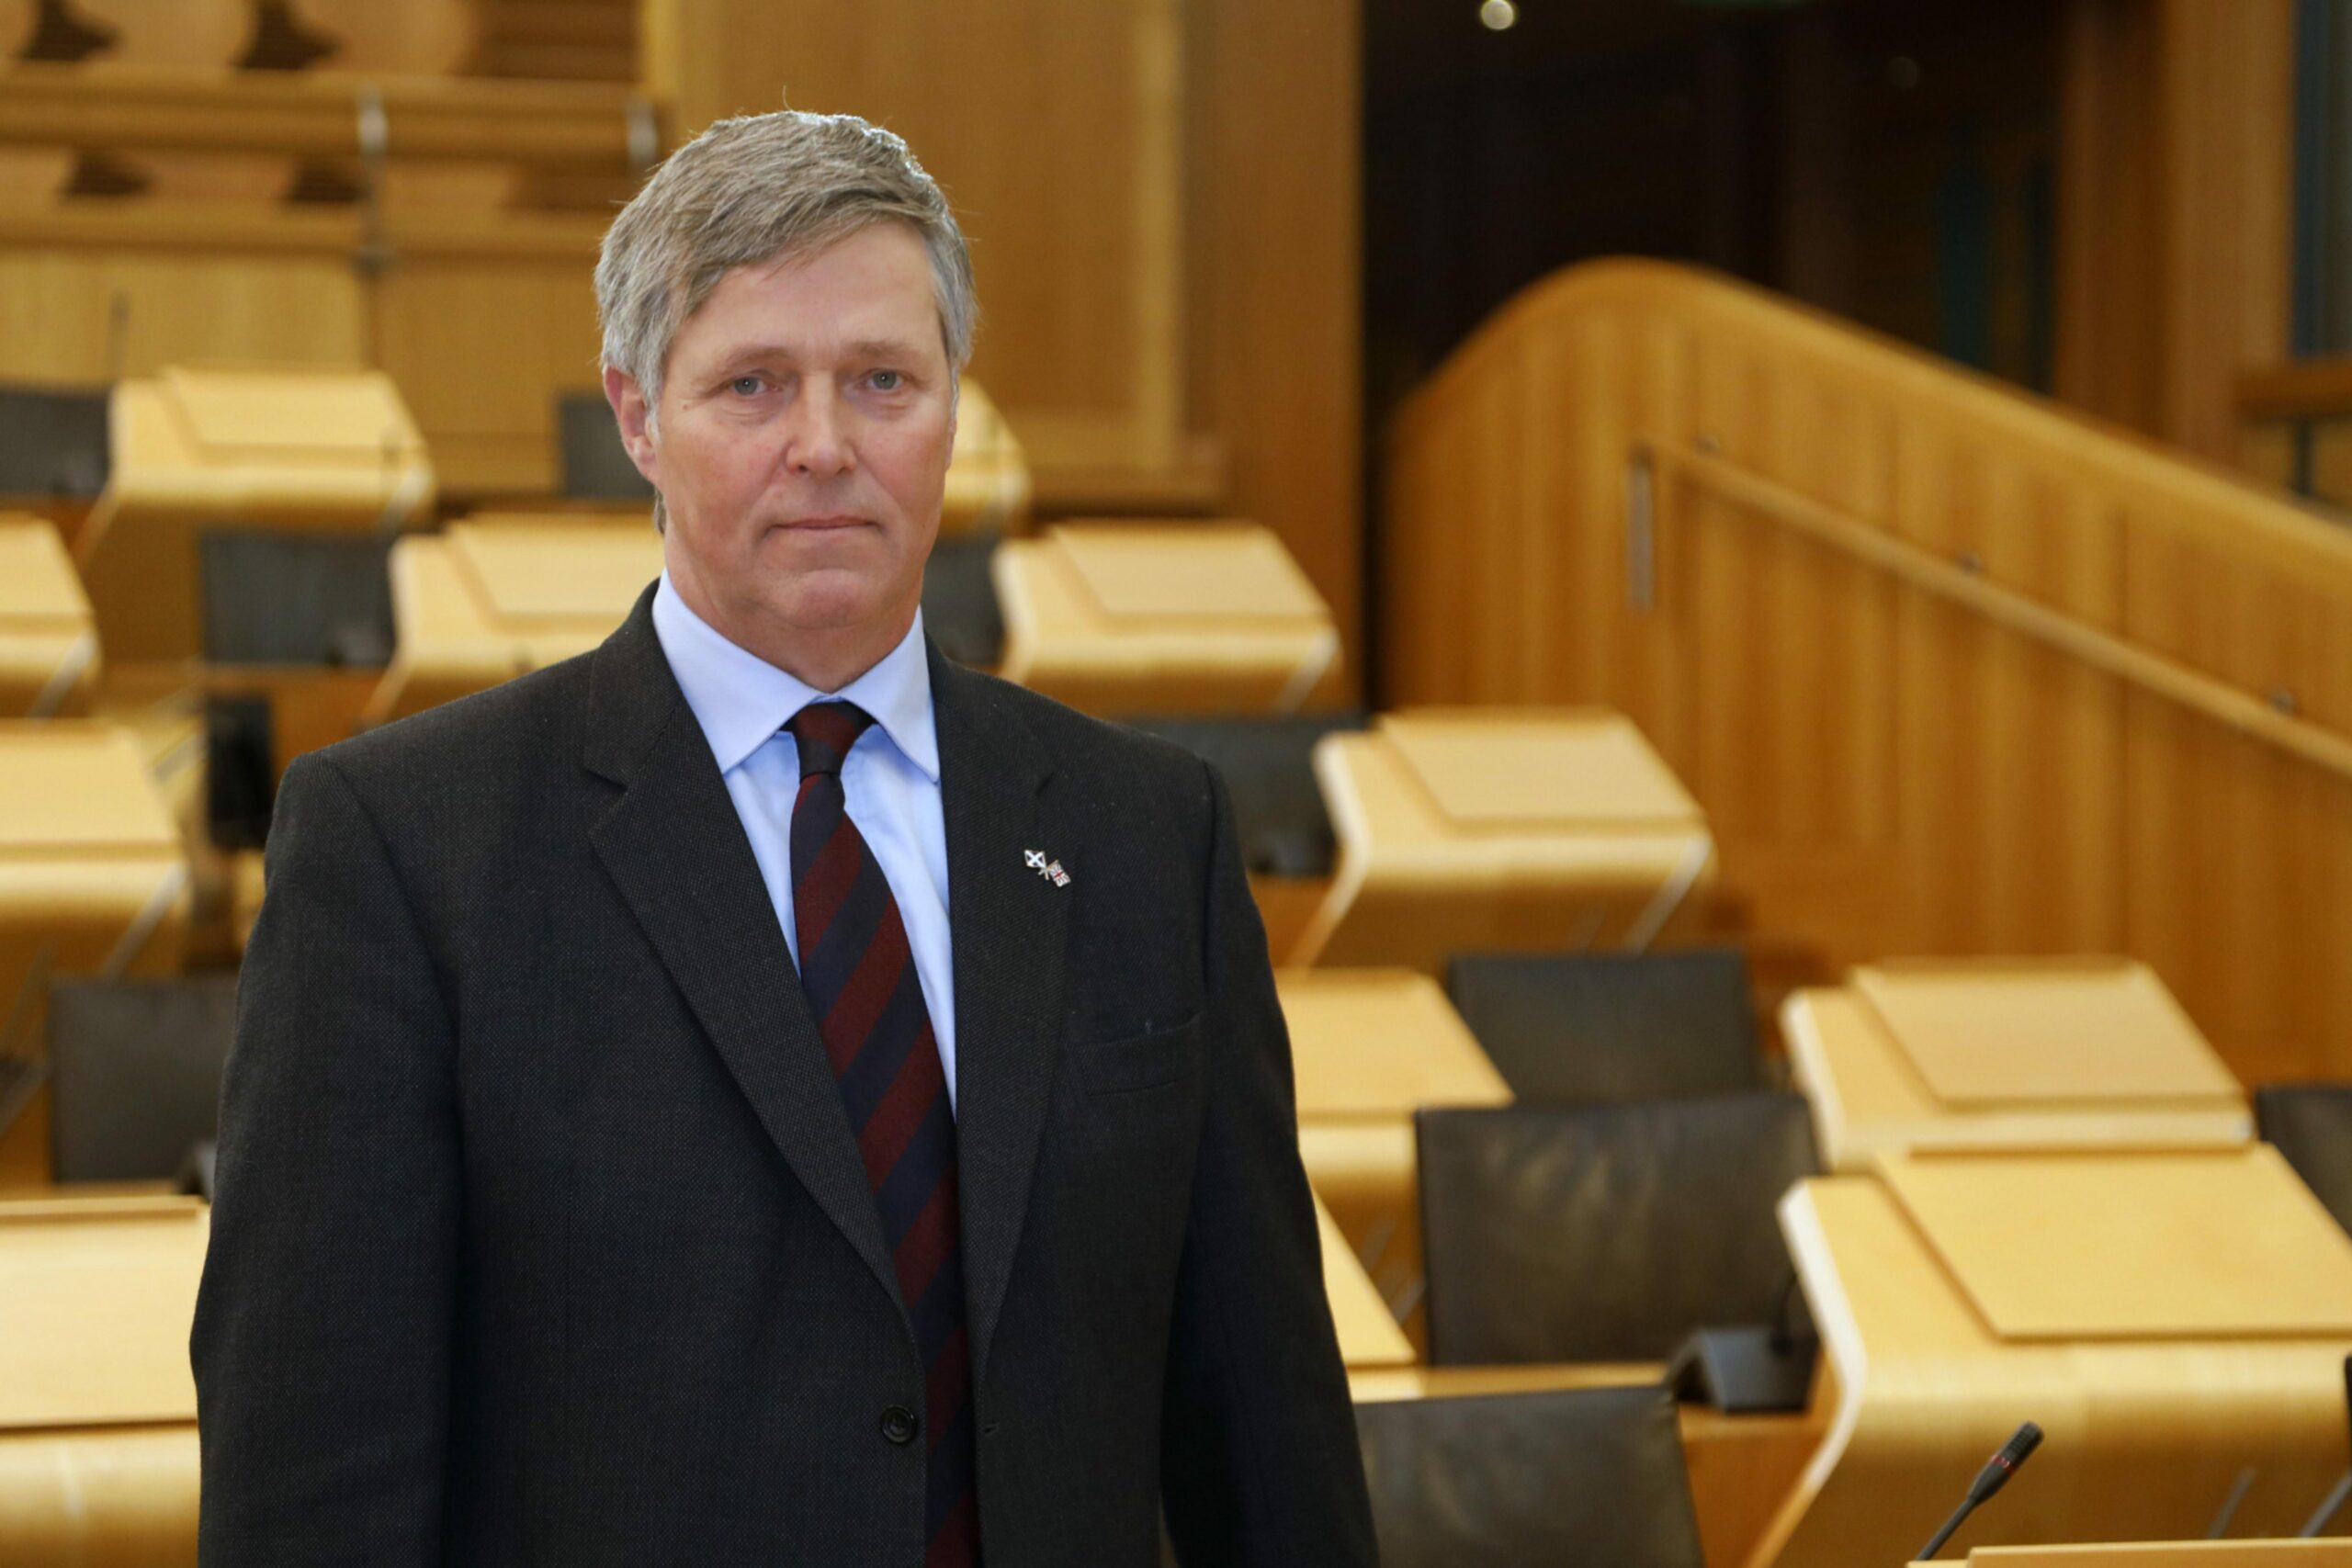 Edward Mountain has urged NHS Highland to speed up treatment times for breast cancer patients. Image: Andrew Cowan/ Scottish Parliament